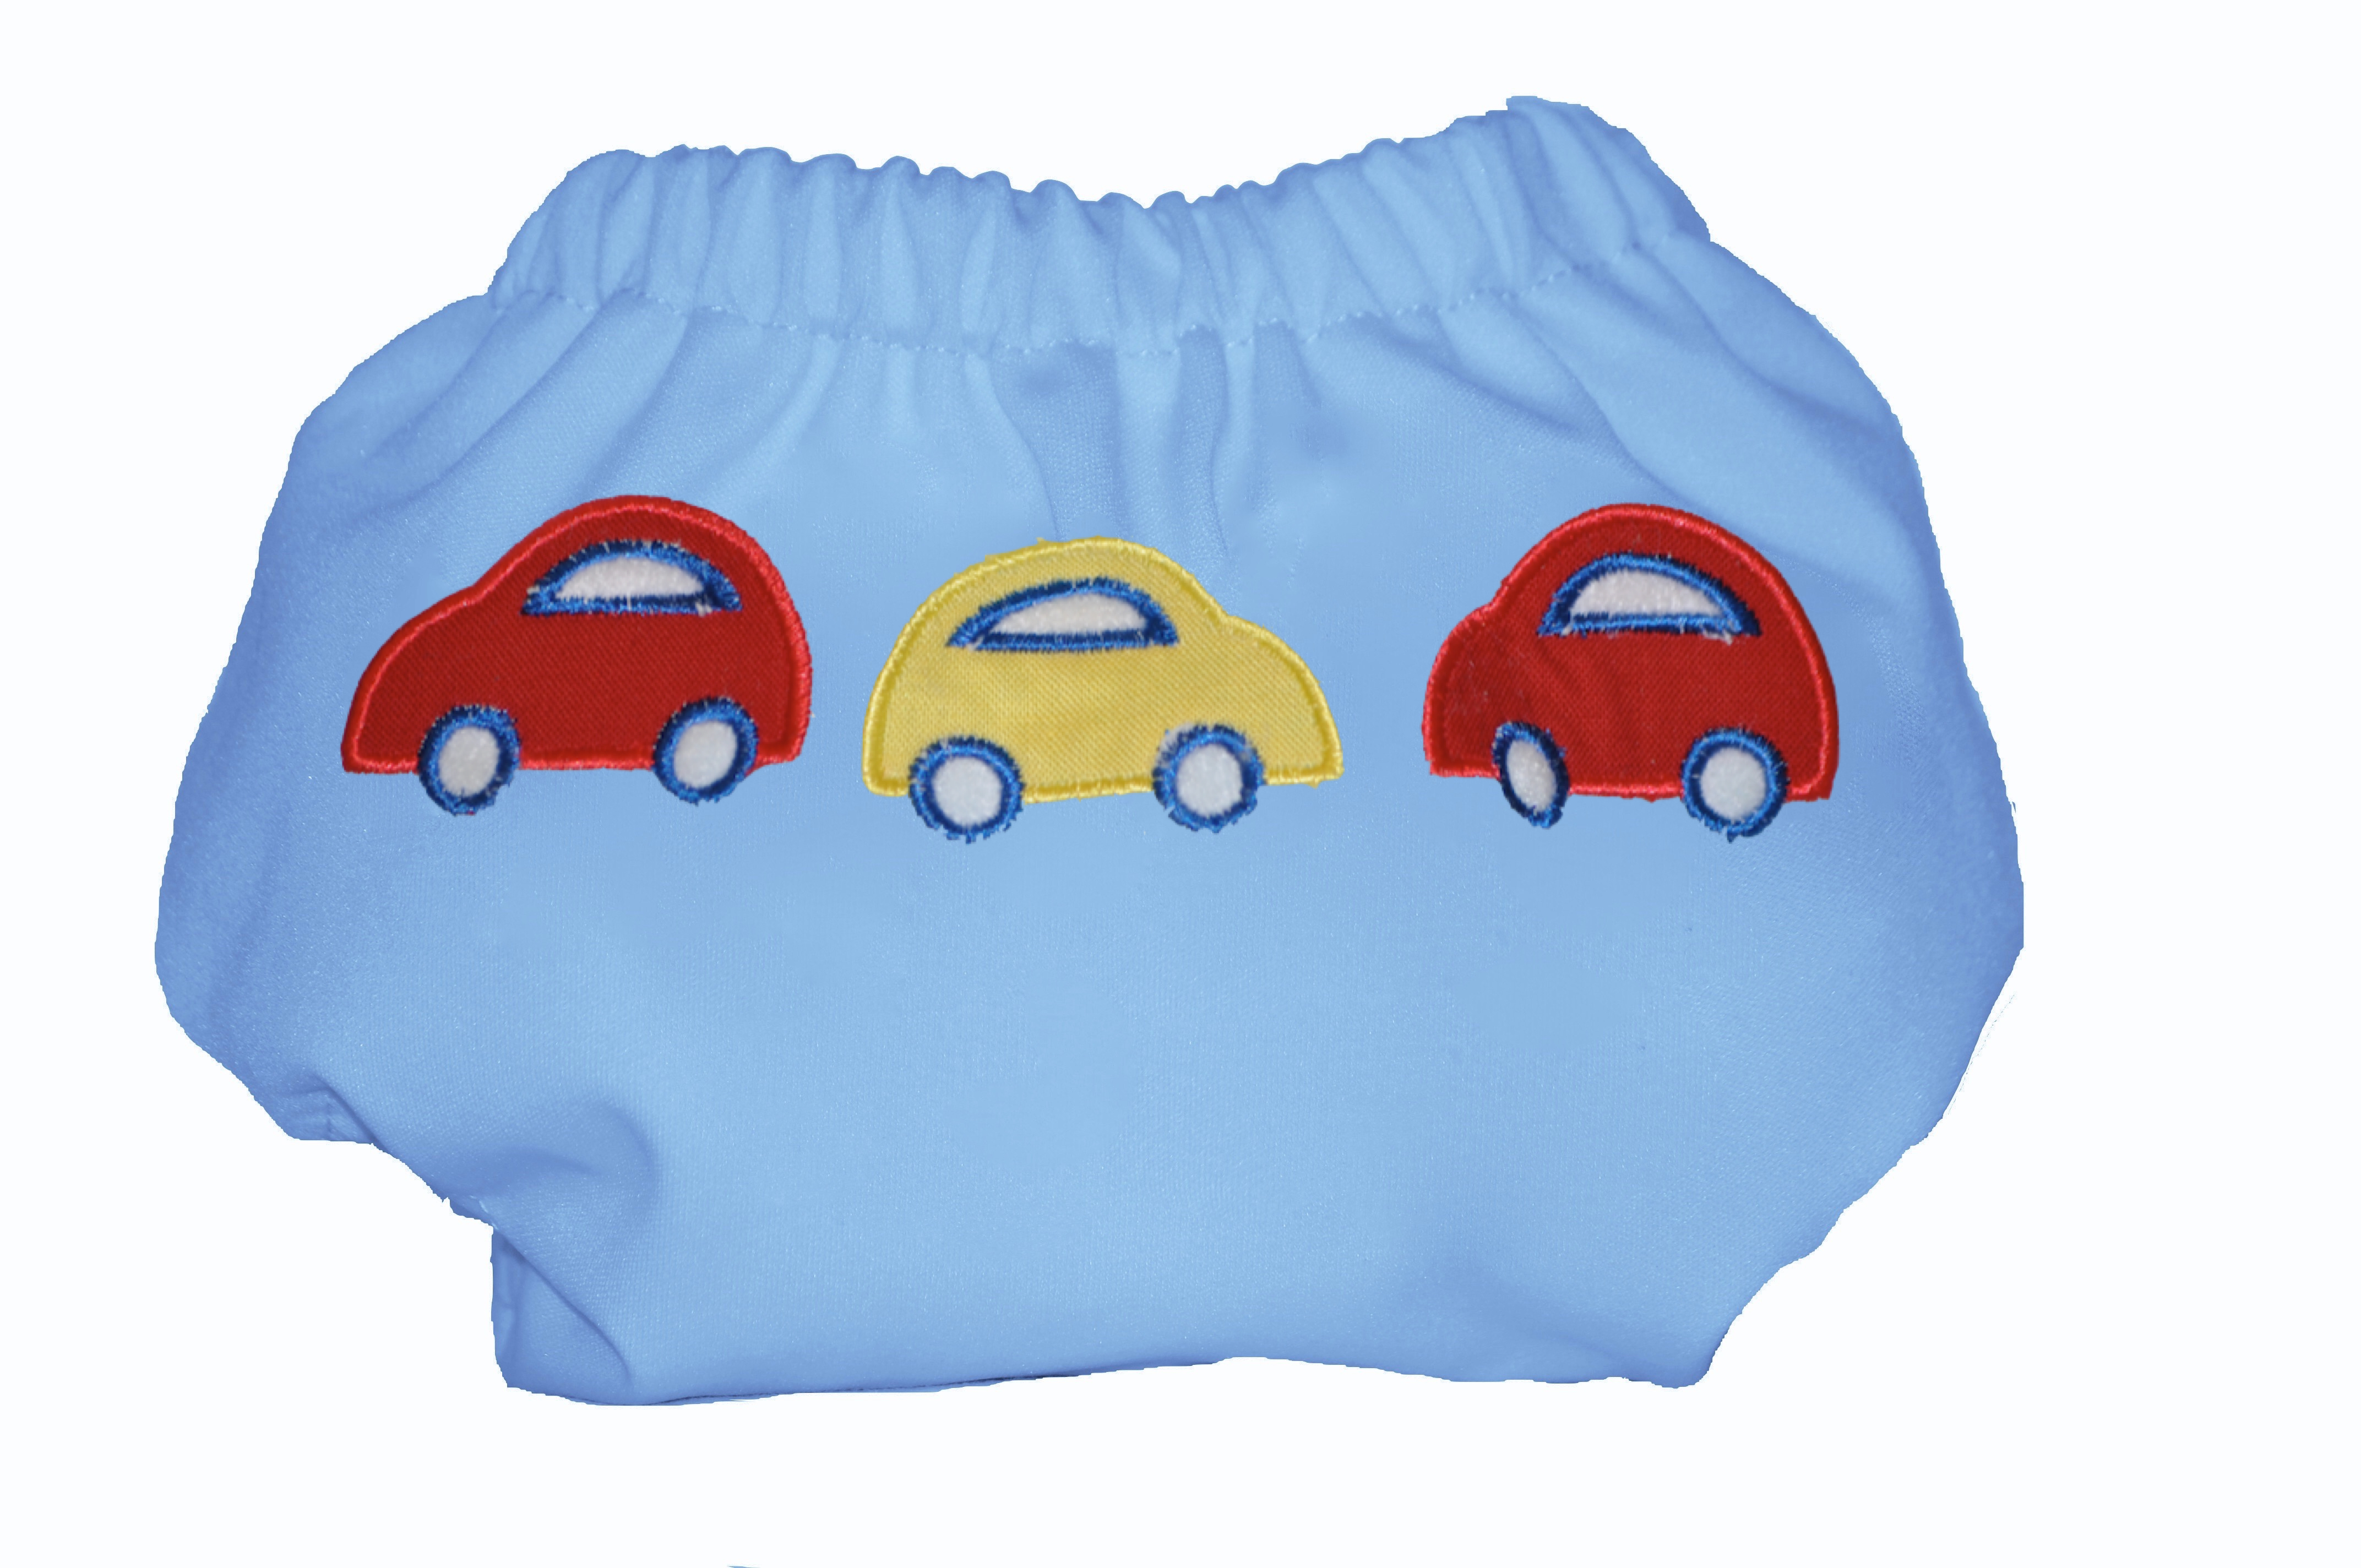 AllComfy One Size Diaper Cover Velcro Closure (2 Pack) "Beep! Beep!"